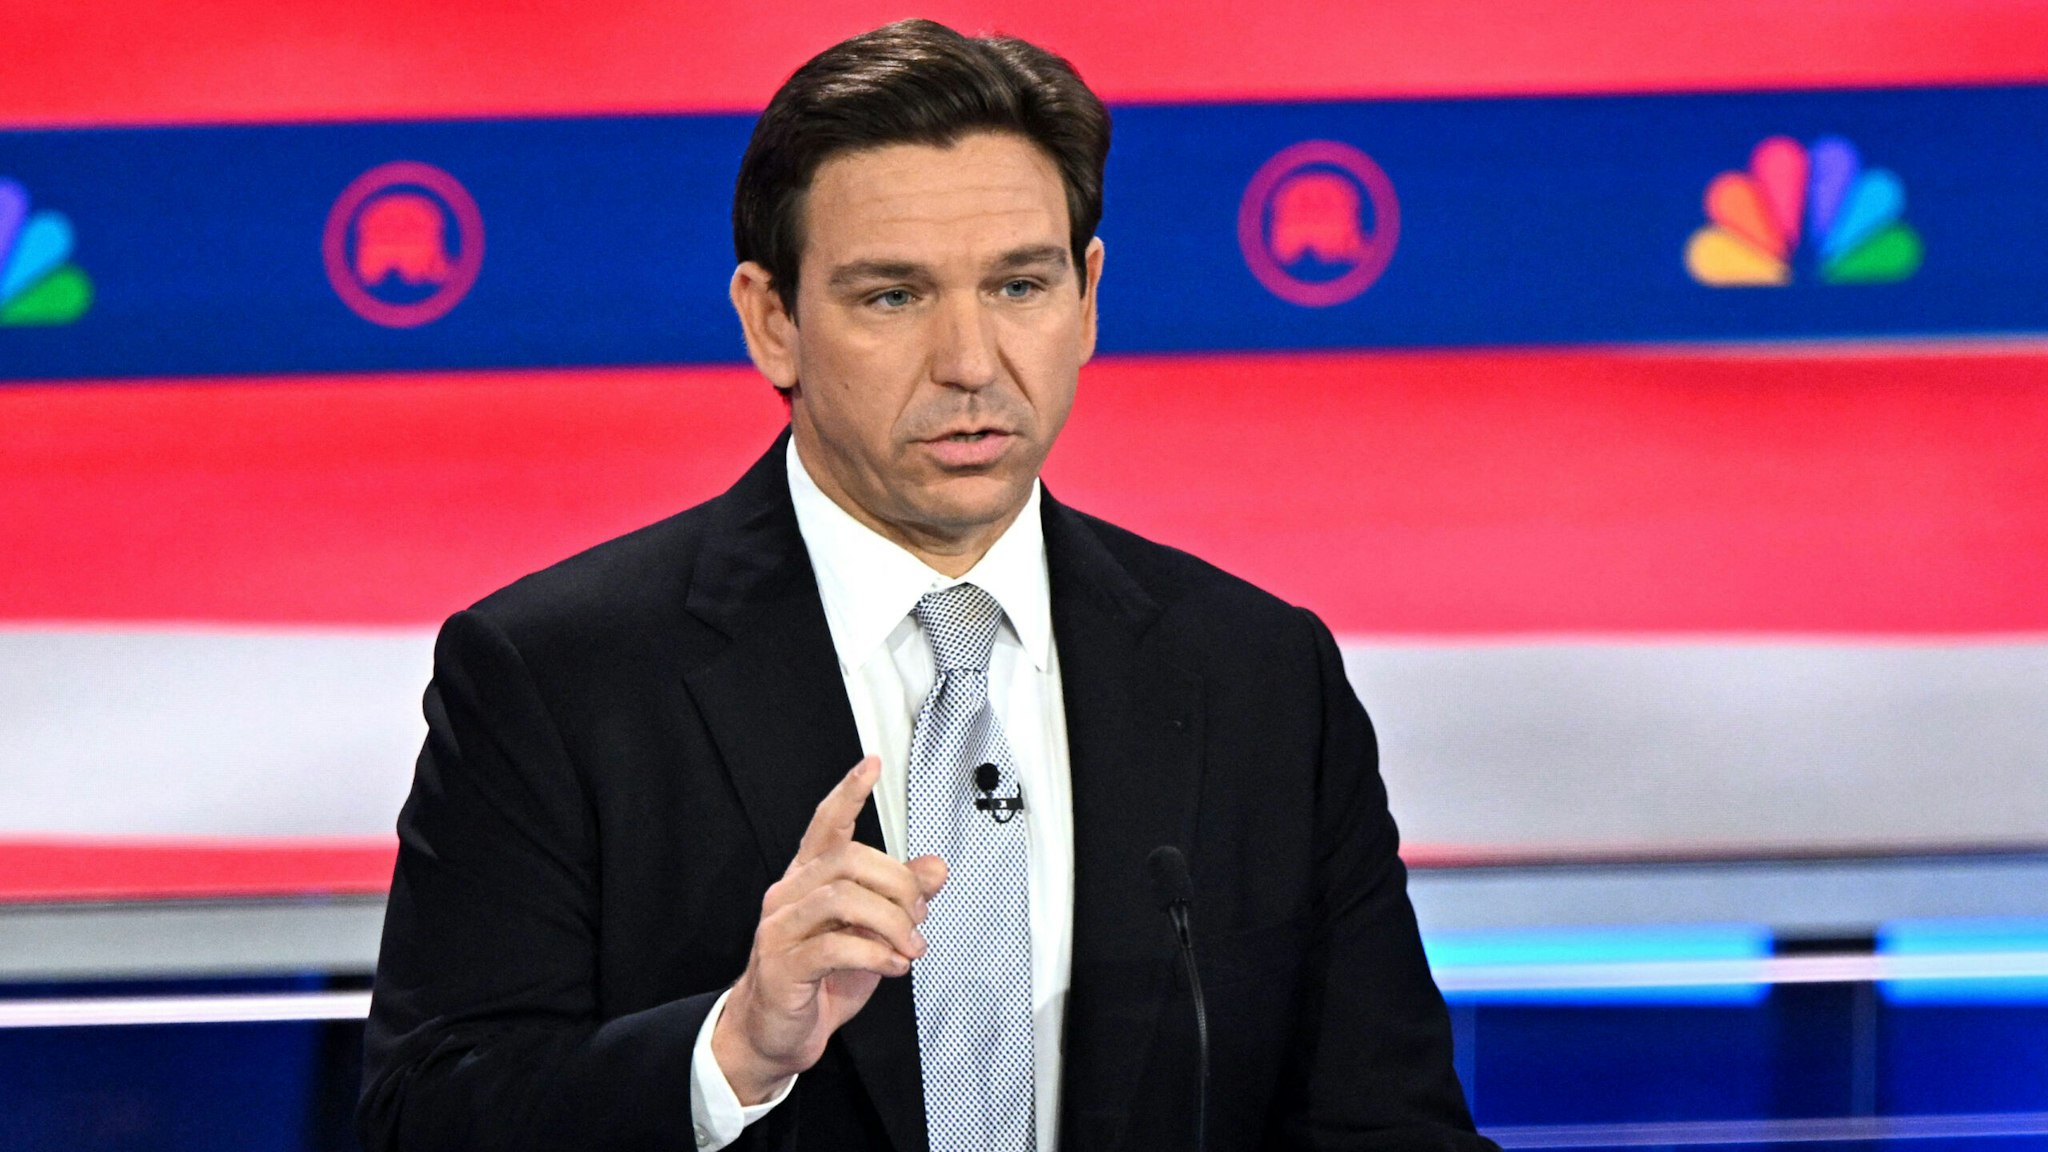 Florida Governor Ron DeSantis speaks during the third Republican presidential primary debate at the Knight Concert Hall at the Adrienne Arsht Center for the Performing Arts in Miami, Florida, on November 8, 2023.